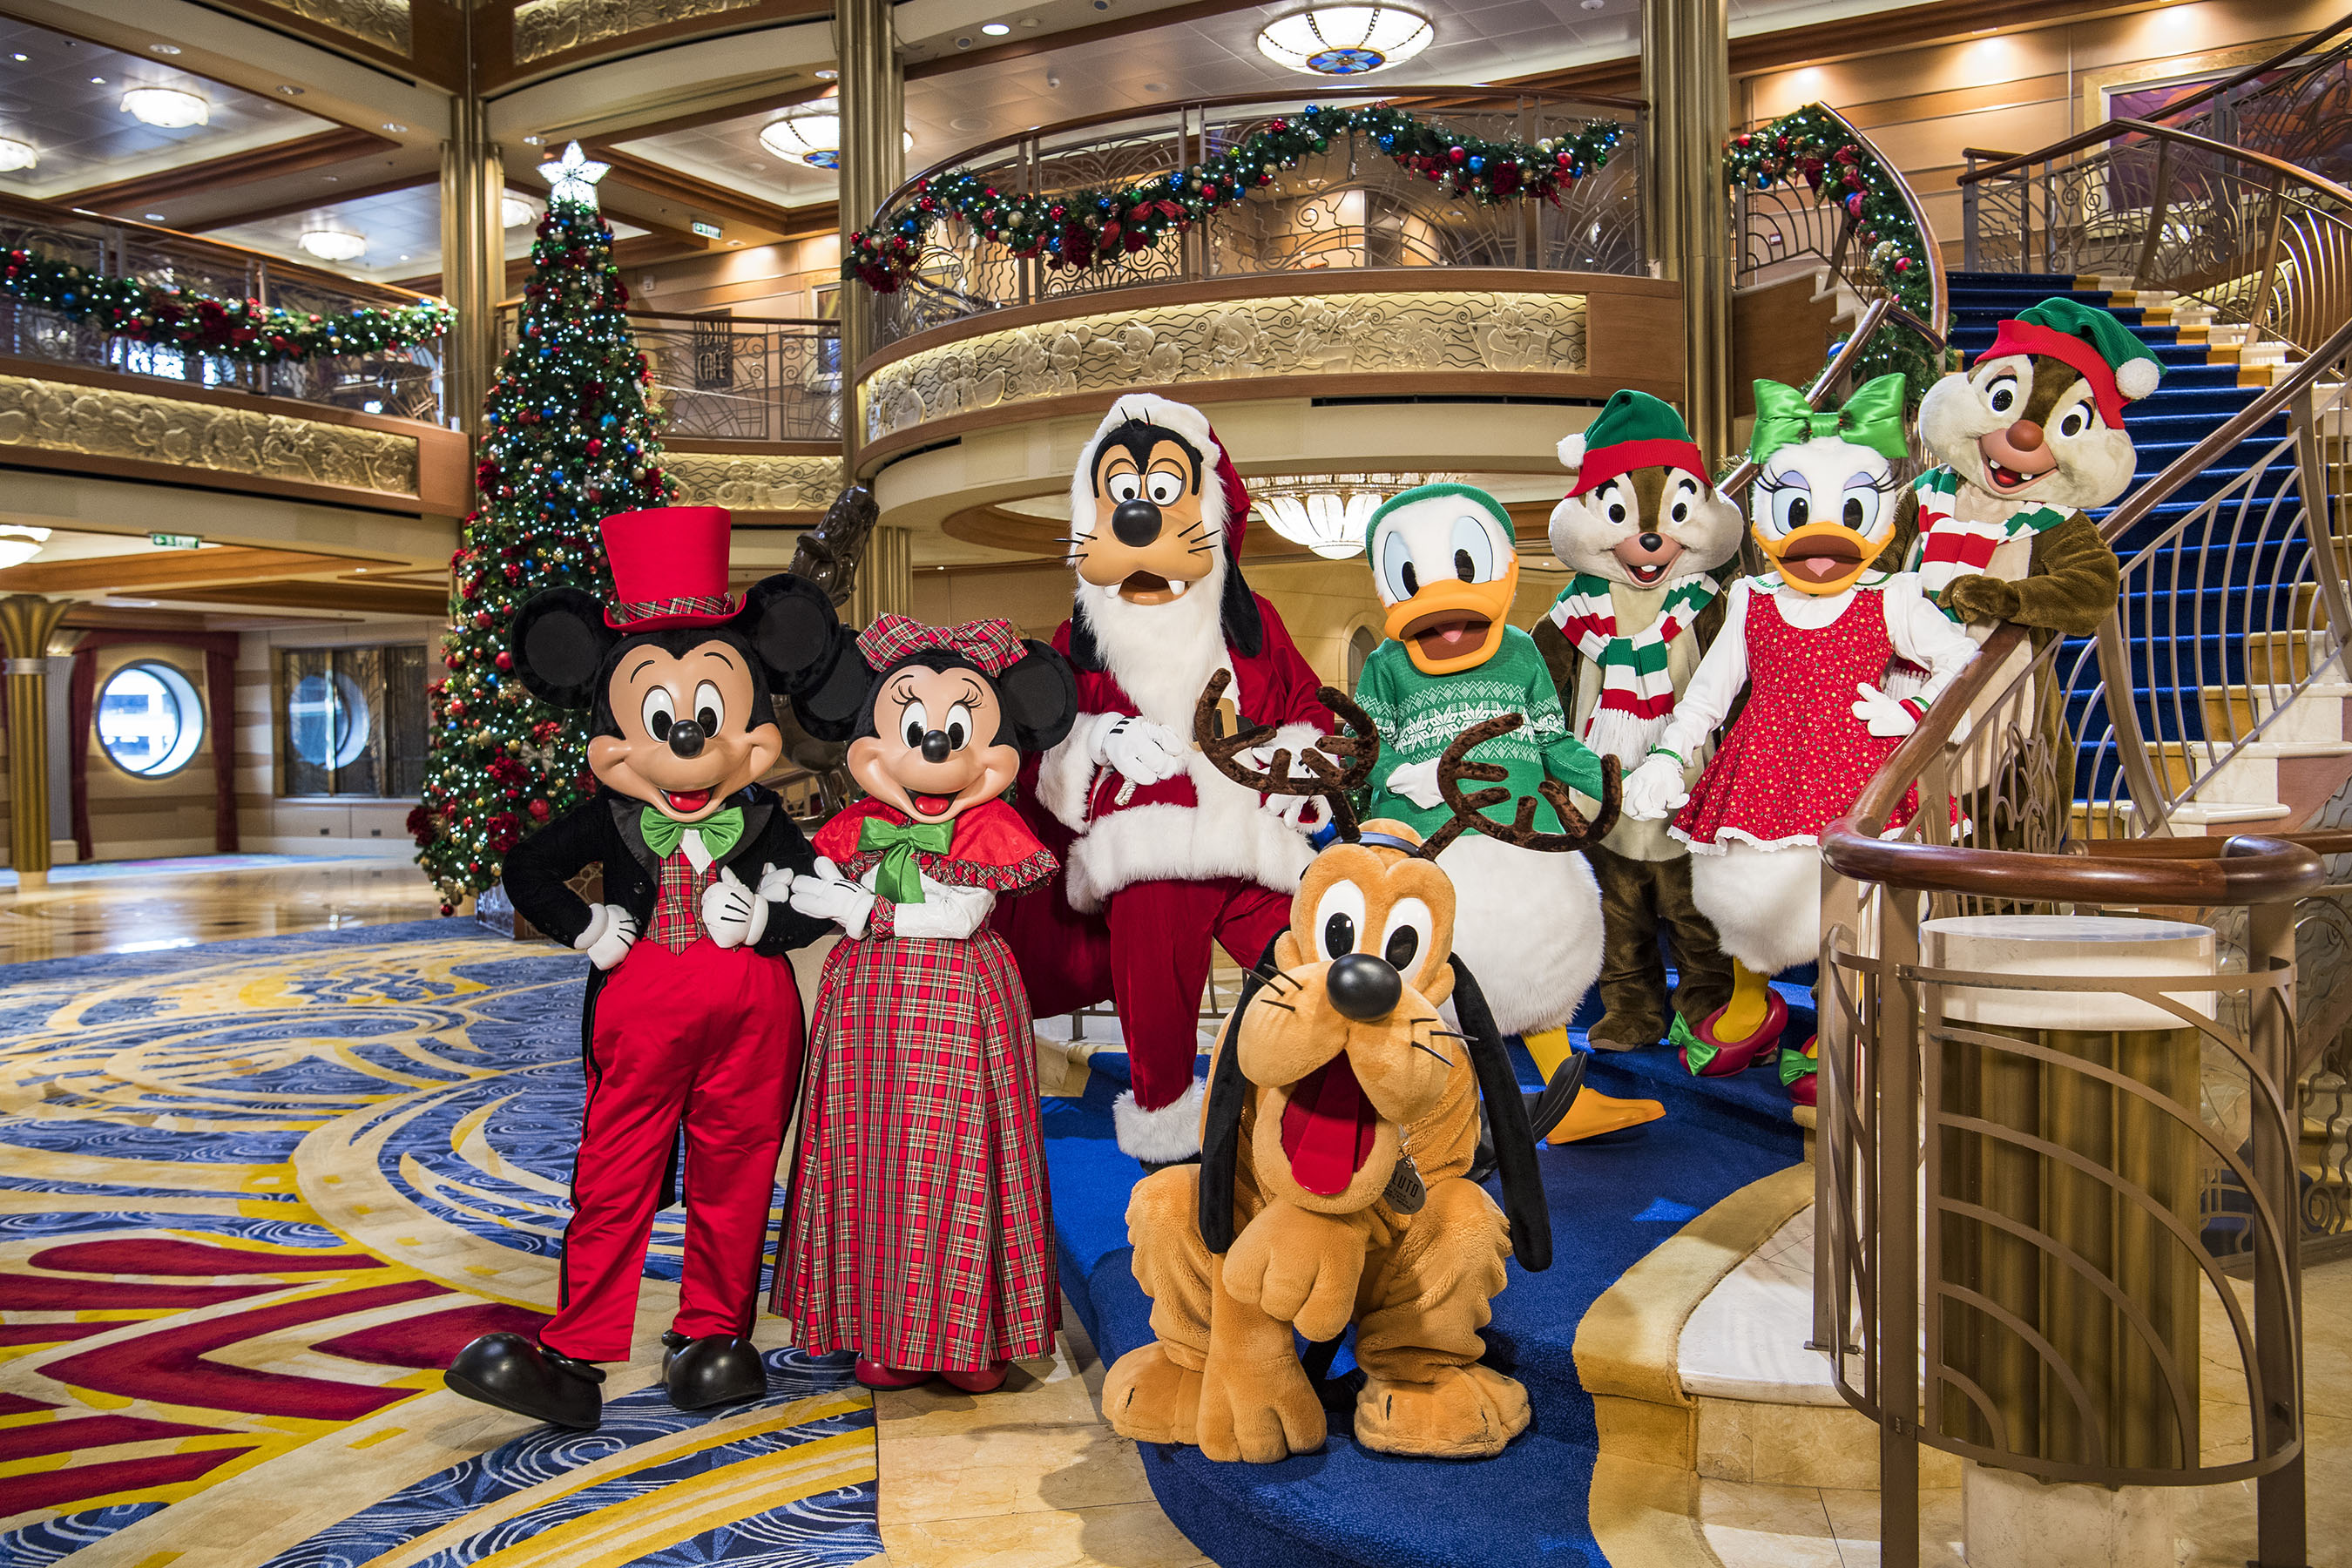 Save Big on Disney Cruise with this New Promotion!